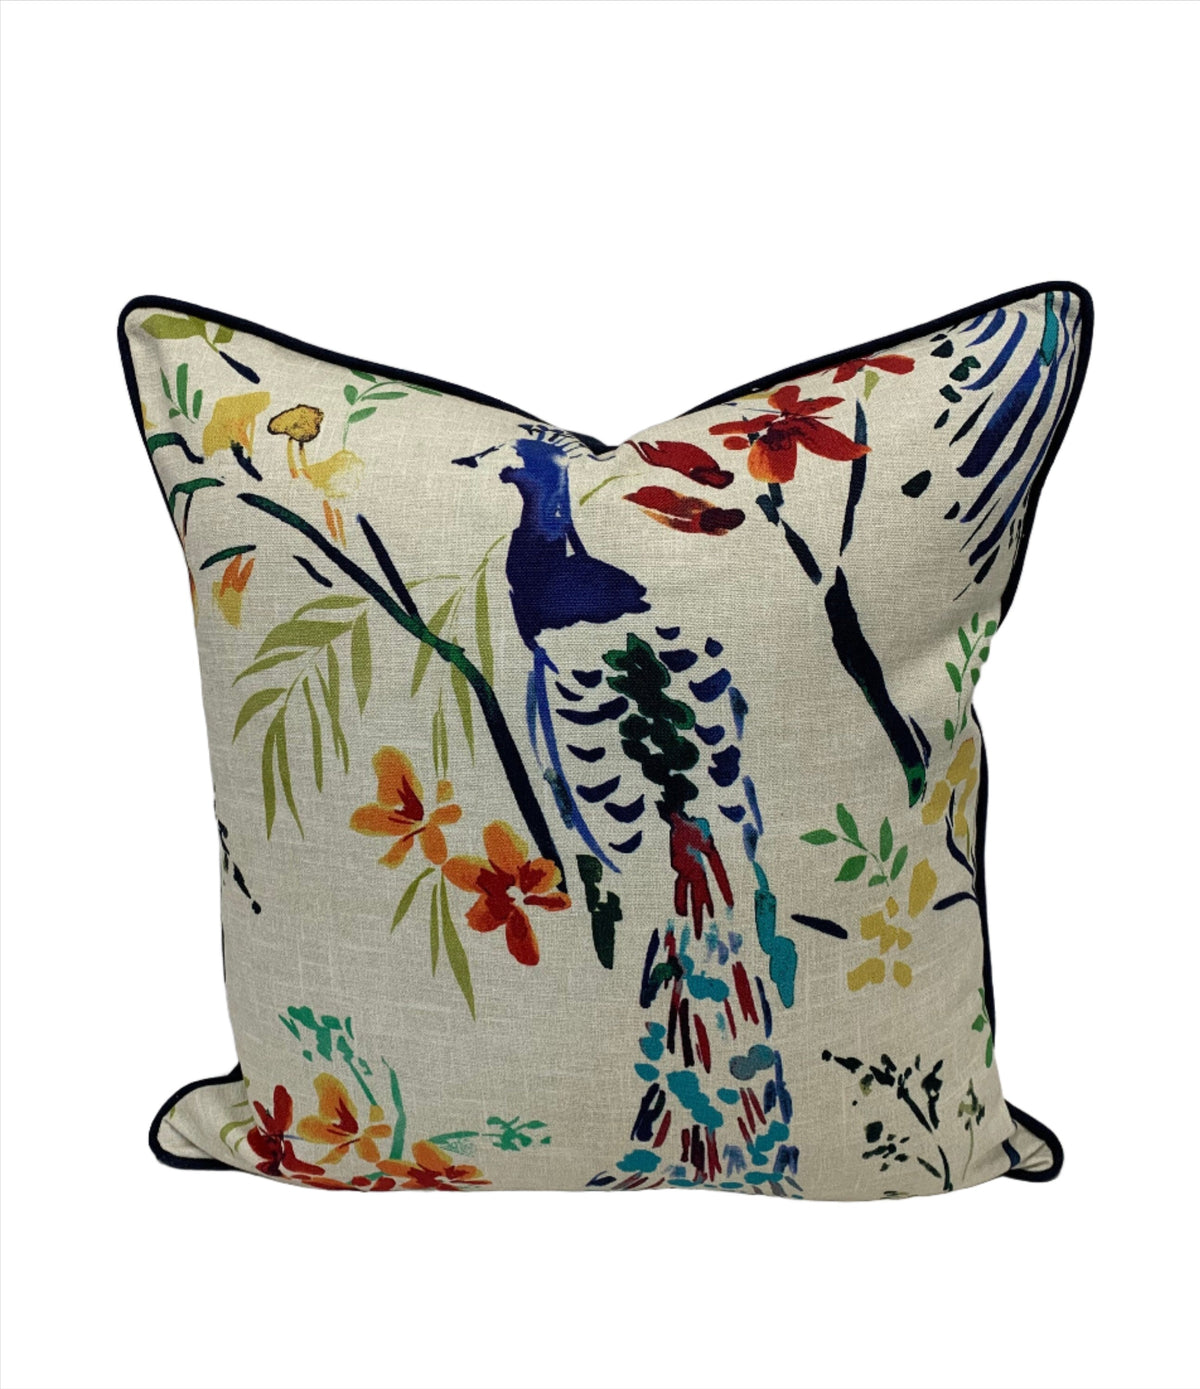 Peacock Textured Tail-feathers Jewel Front & Solid Organic Navy Back Decorative Pillow